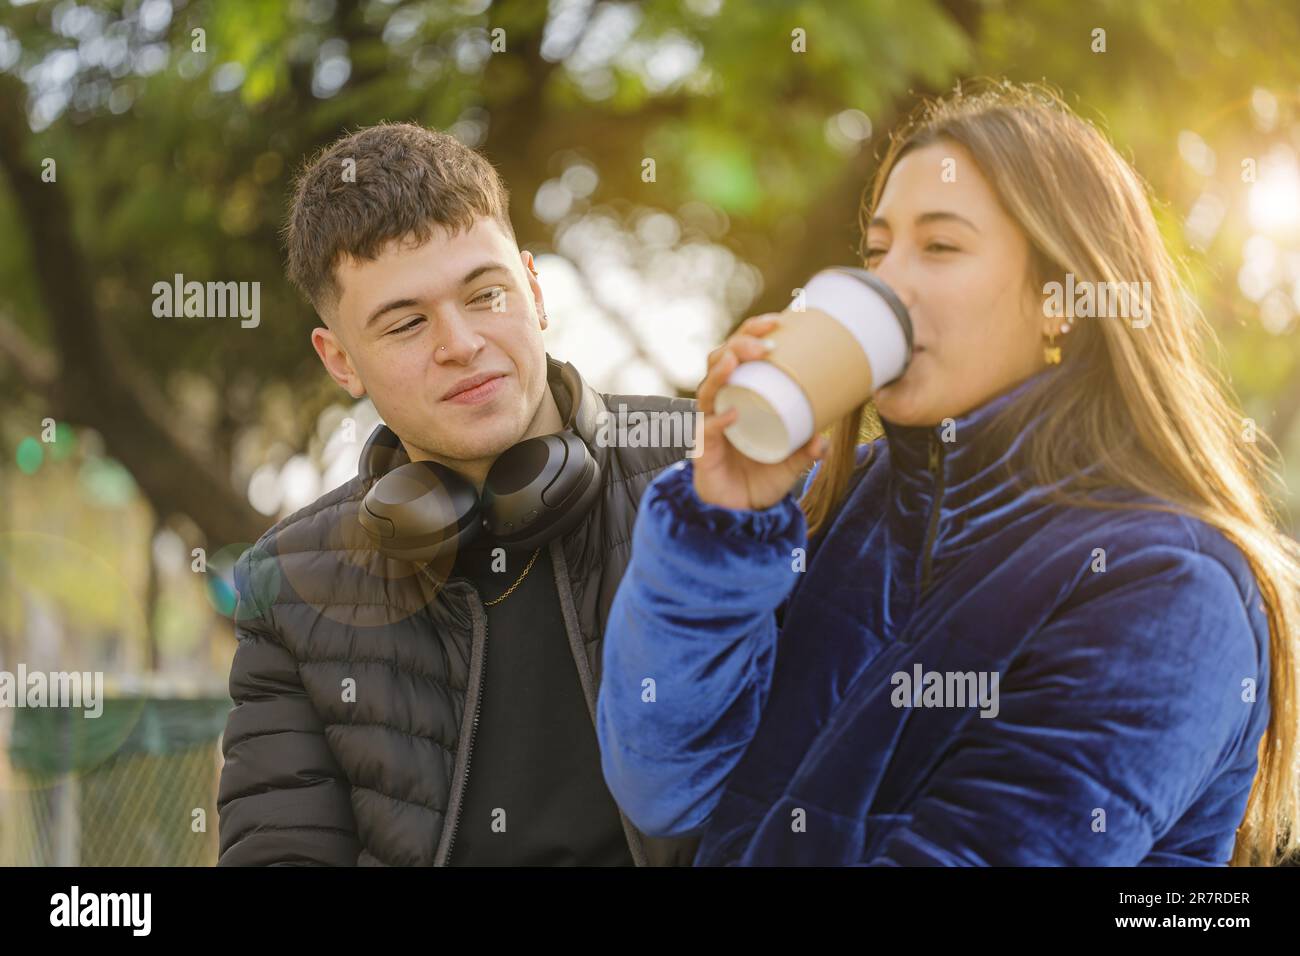 Boy looking at a Latina girl drinking coffee on the bench in a public park. Stock Photo